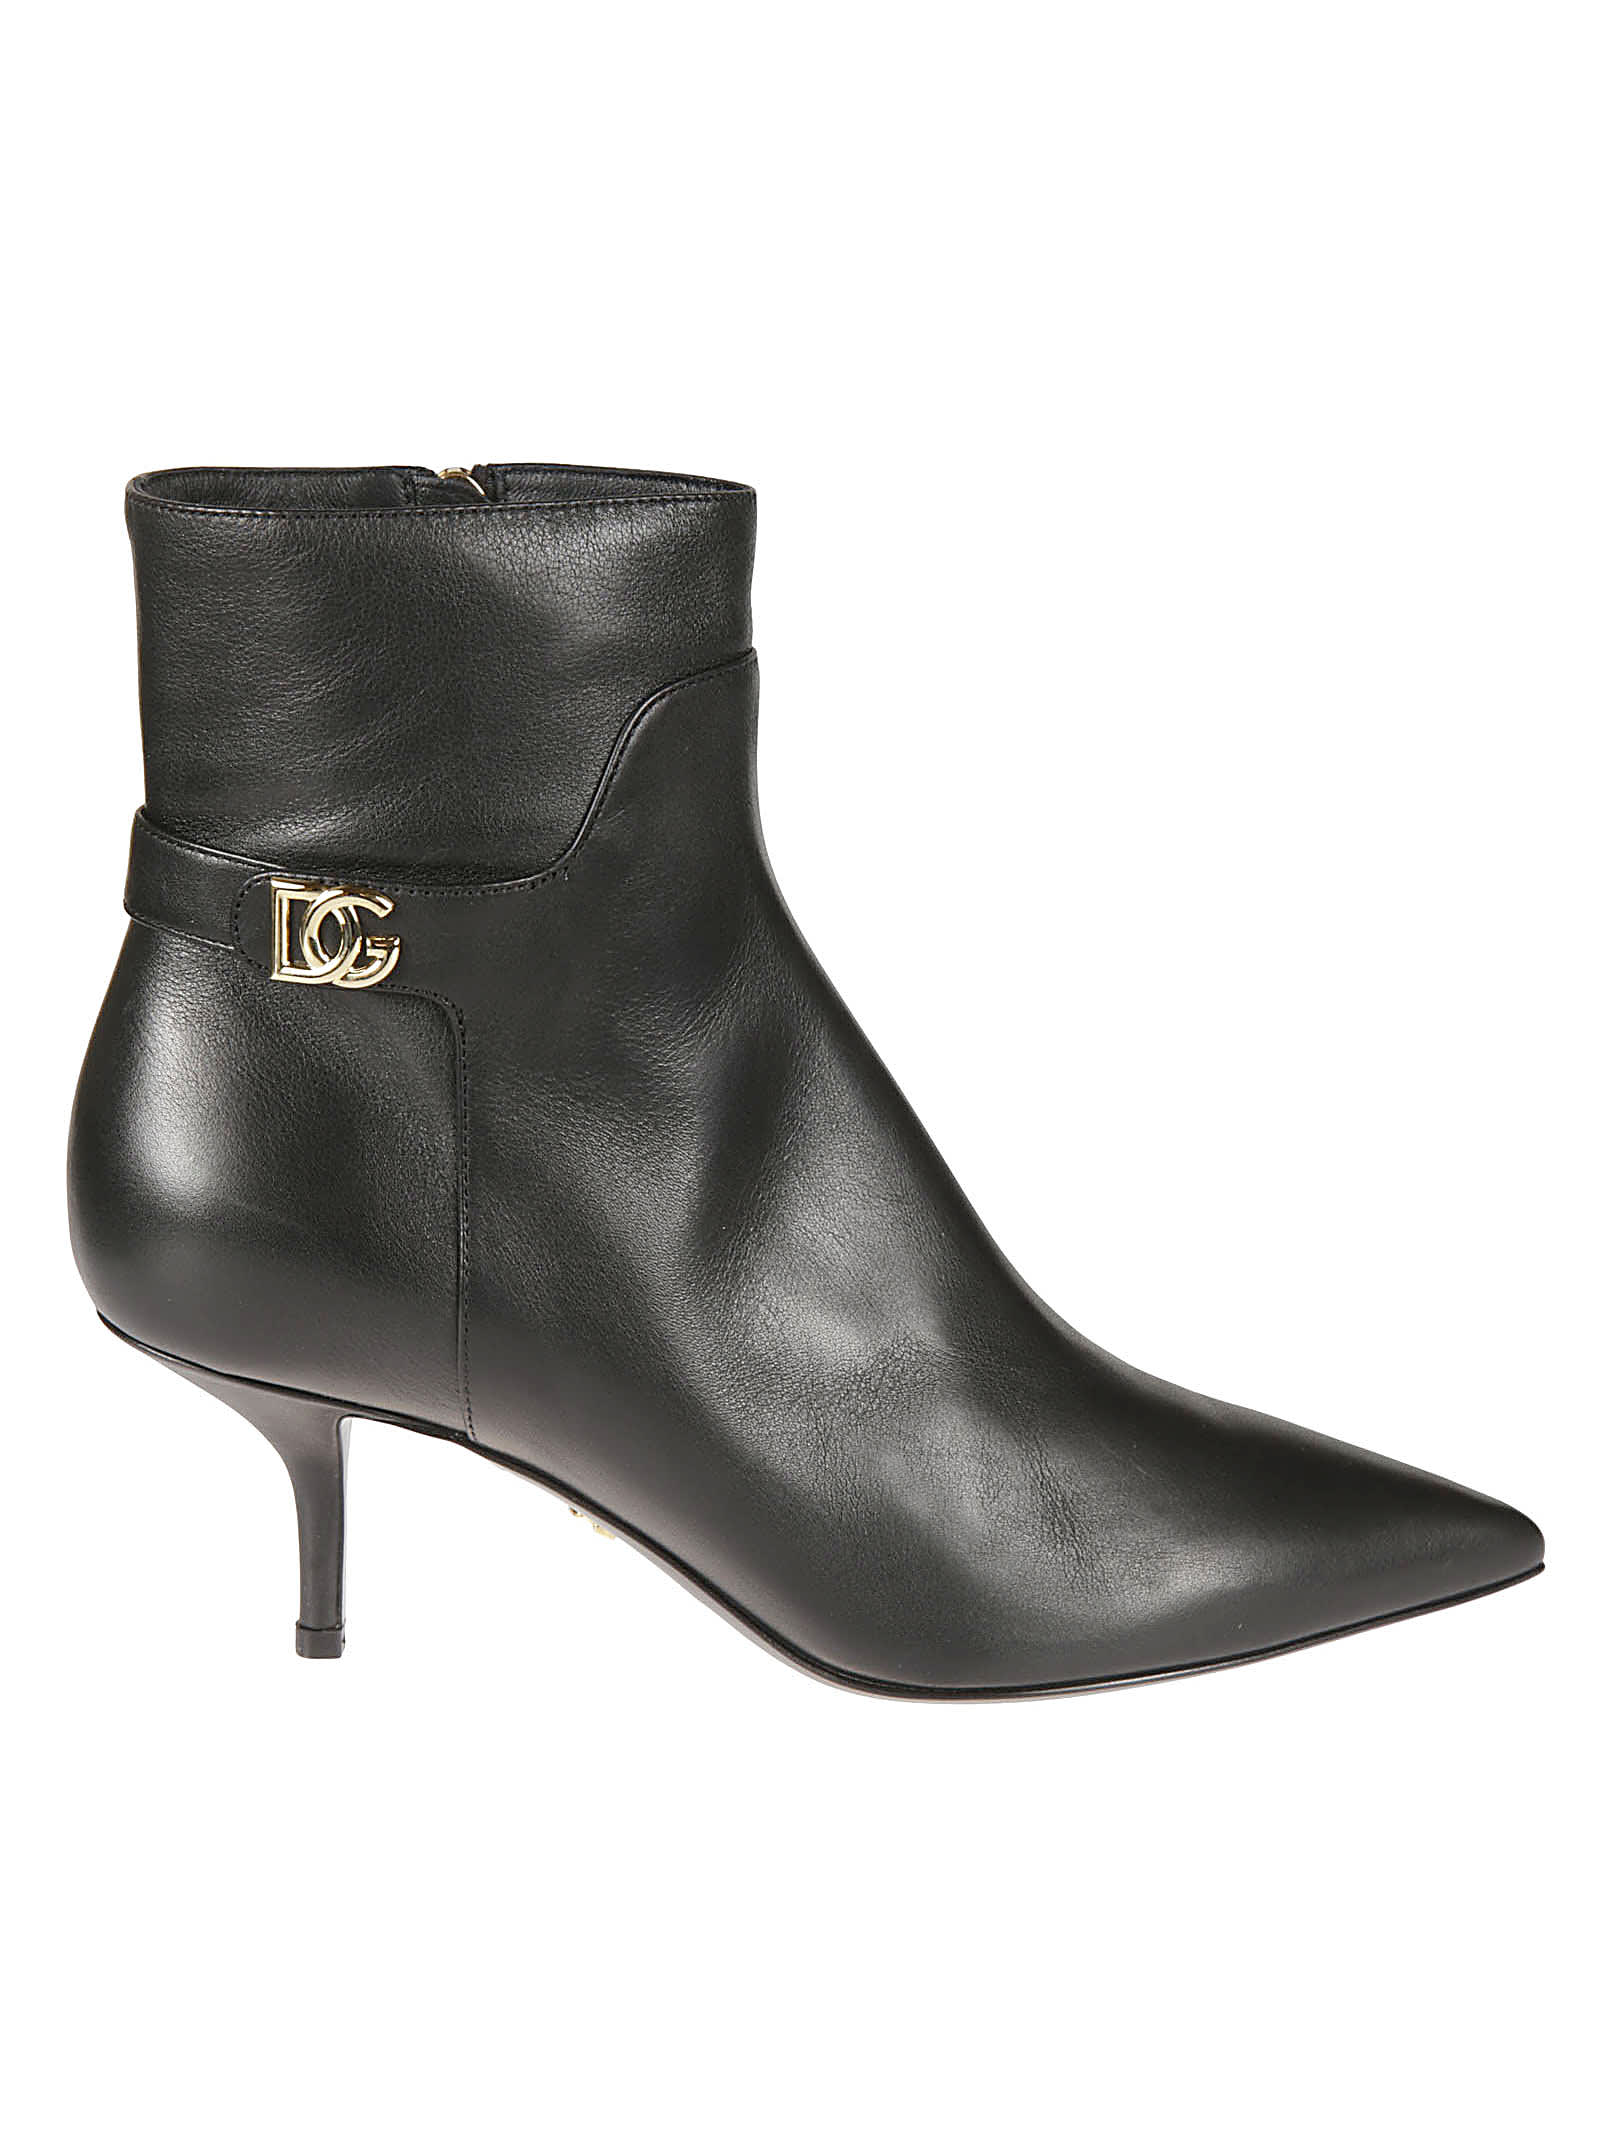 Dolce & Gabbana Side Zipped Logo Plaque Ankle Boots